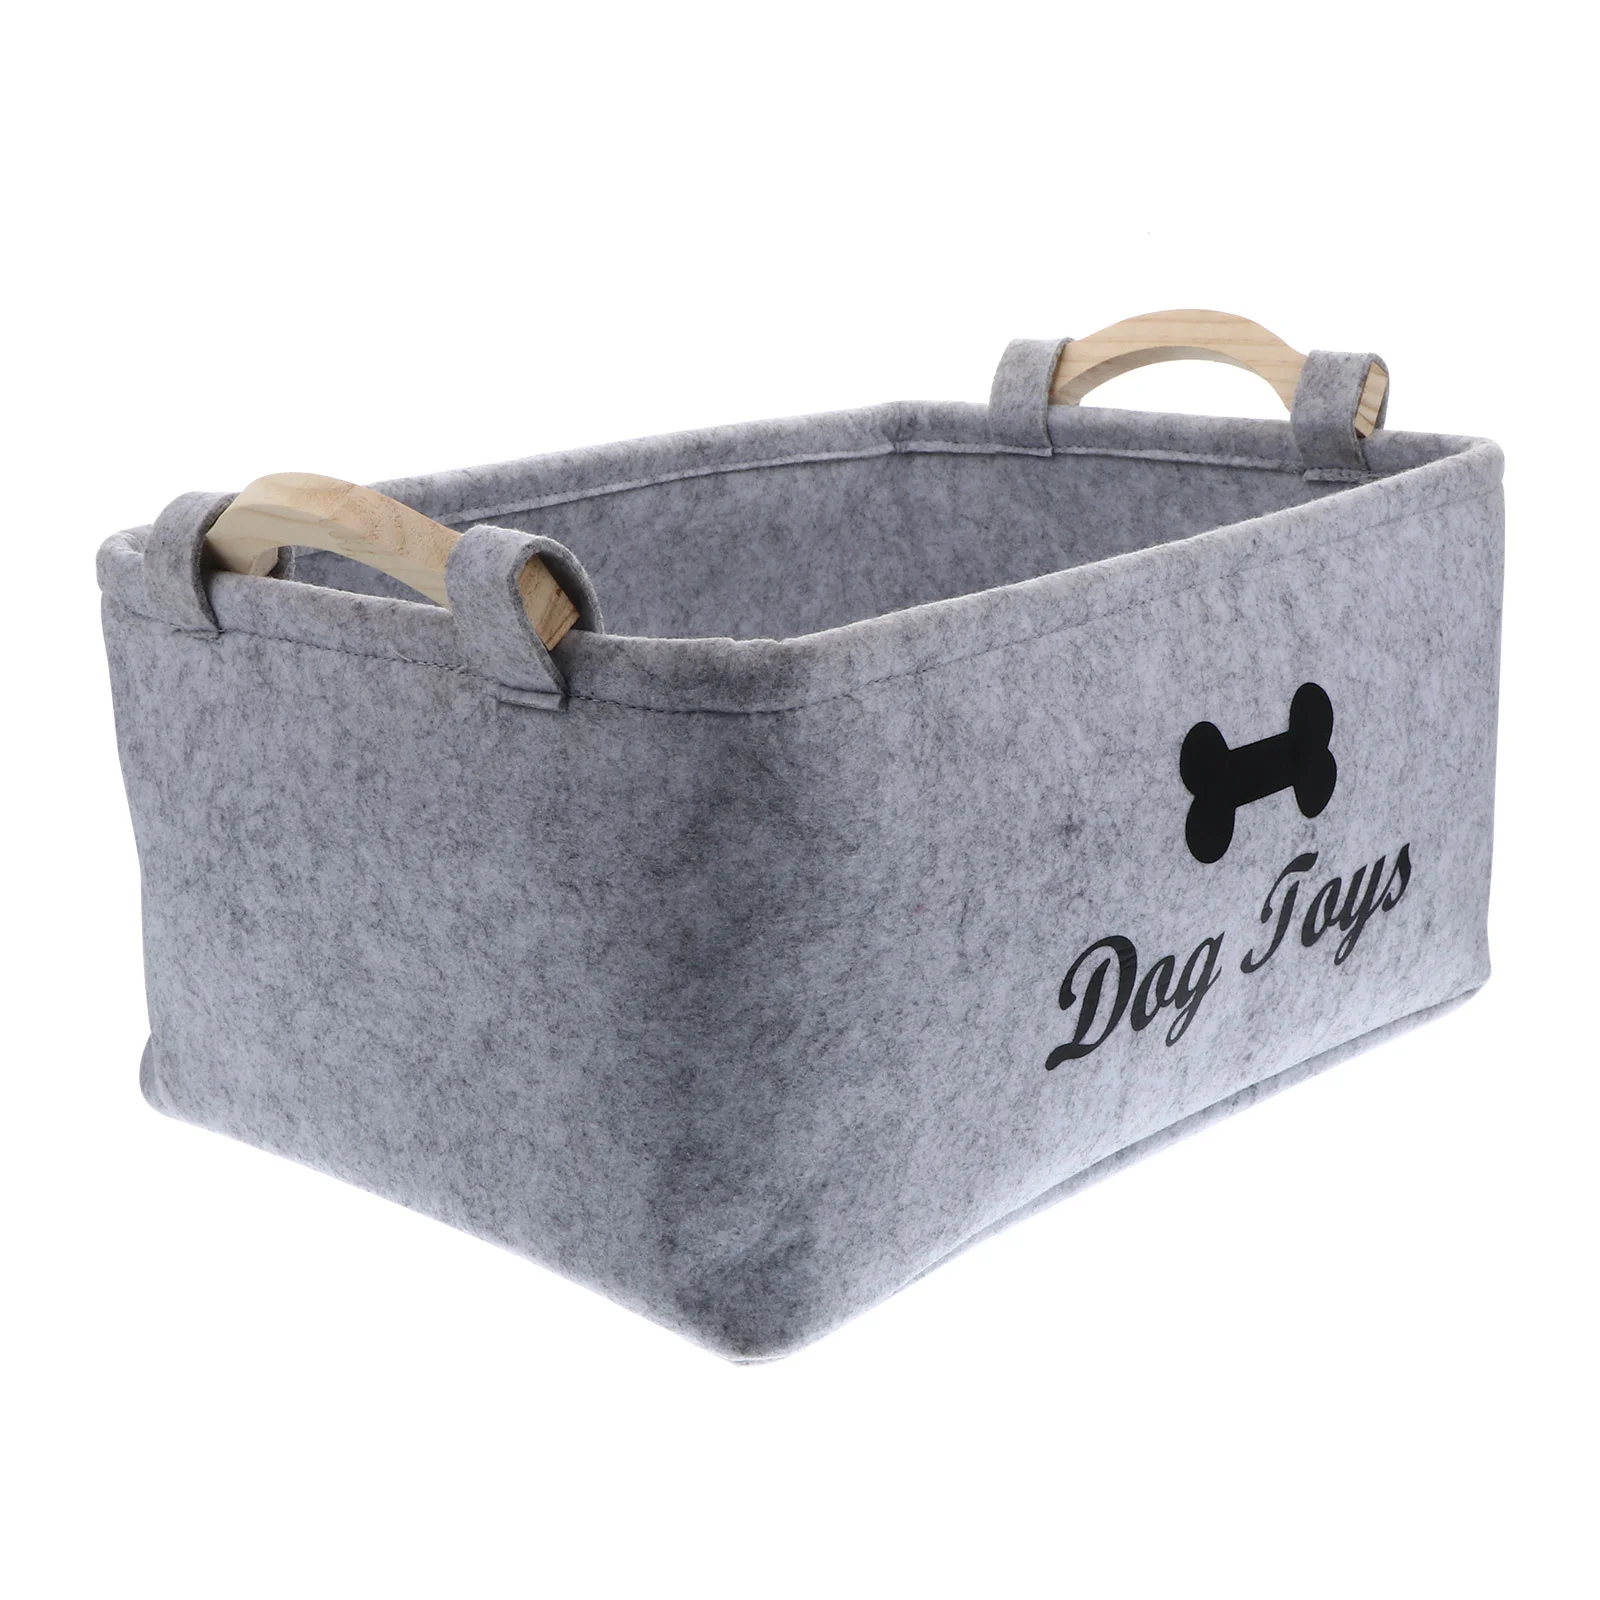 Accessorybaskets Container Foldablebins Dogs Outdoorholder Towel Soft